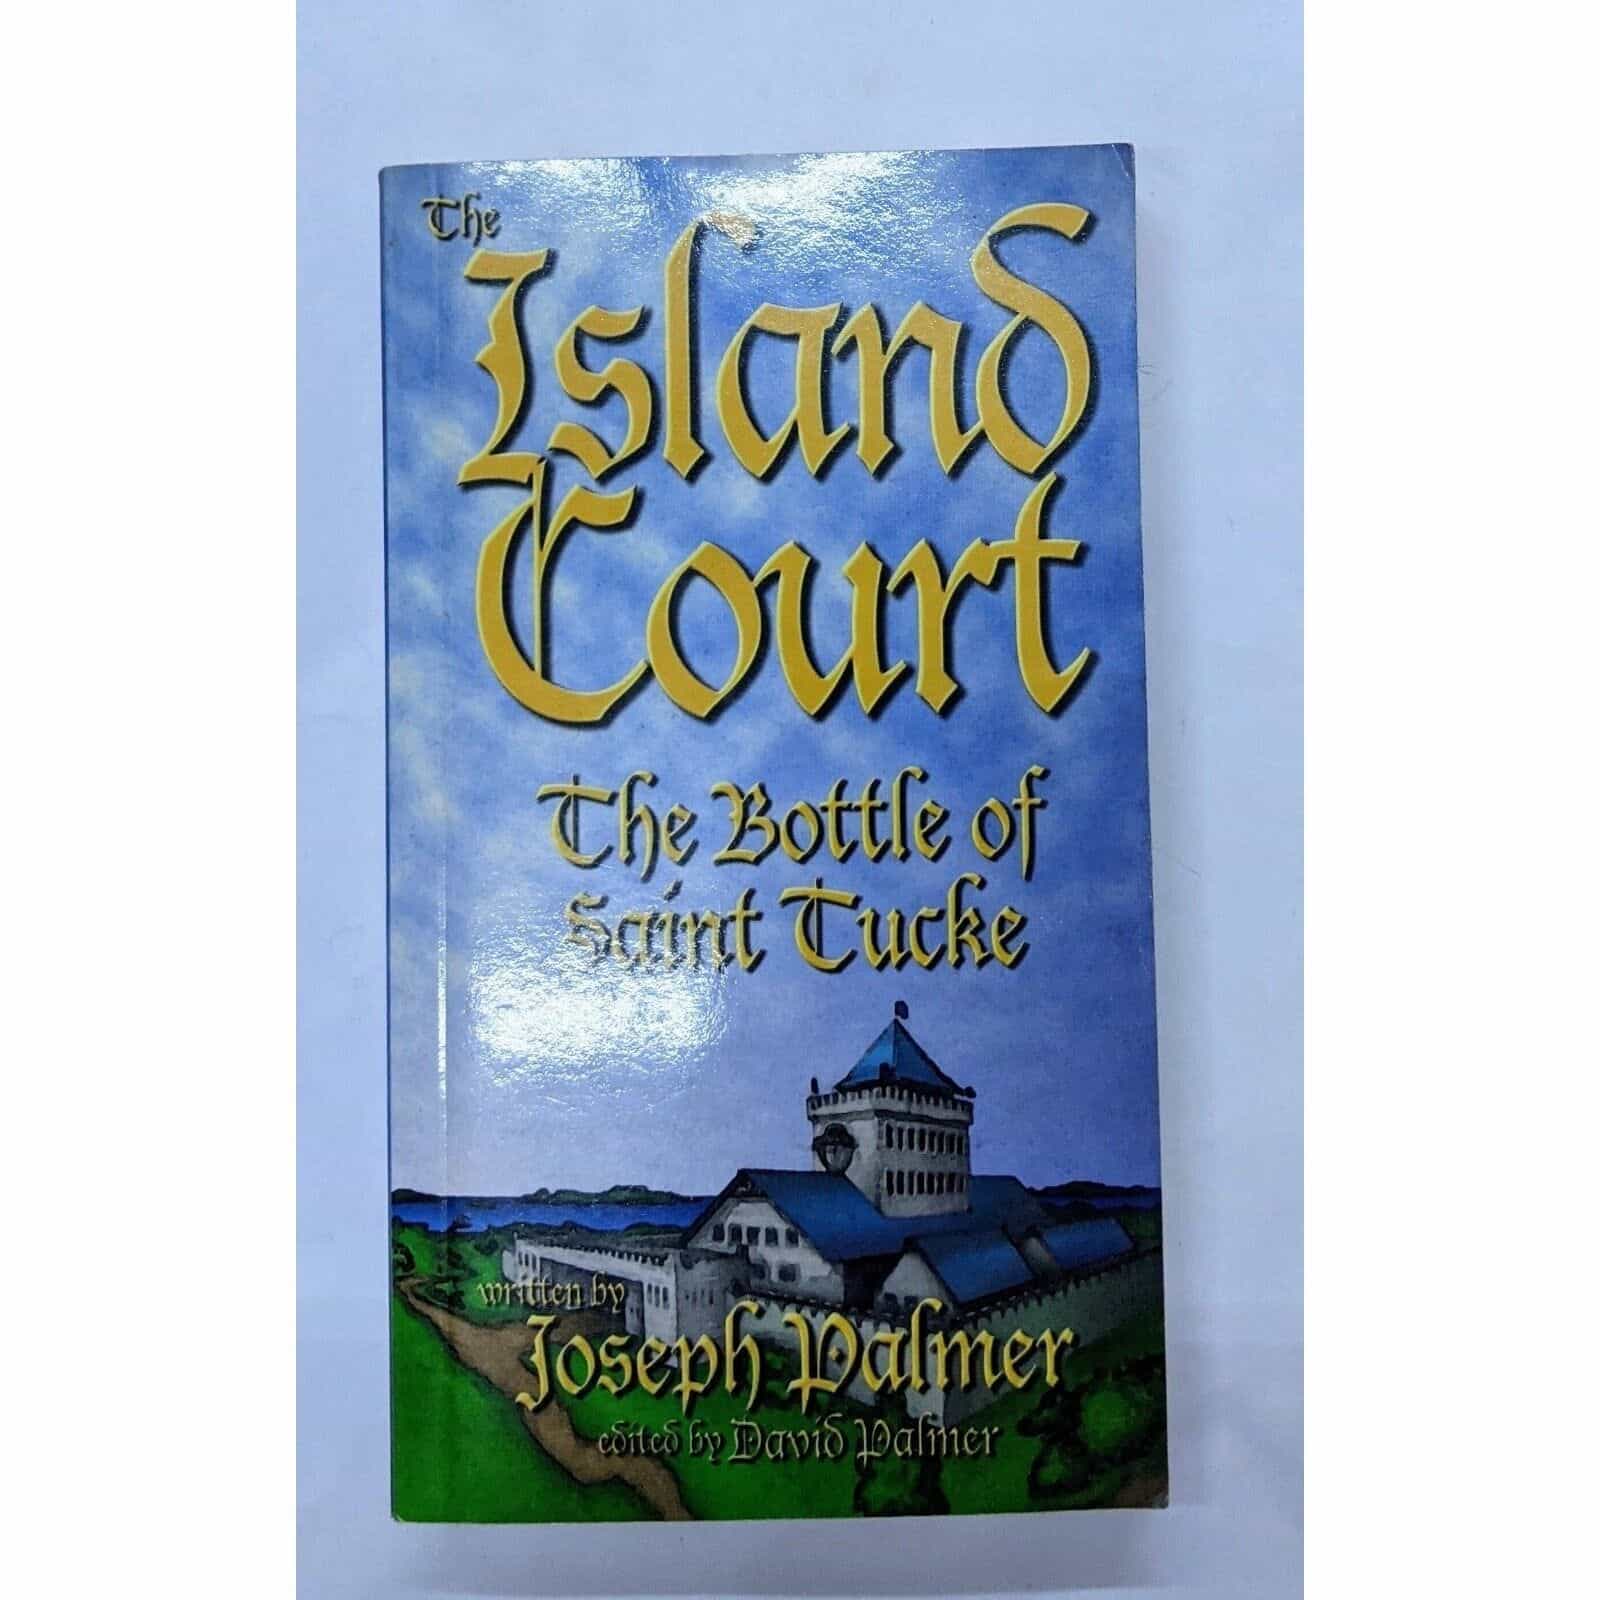 The Island Court The Bottle Of Saint Tucke by Joseph Palmer Book